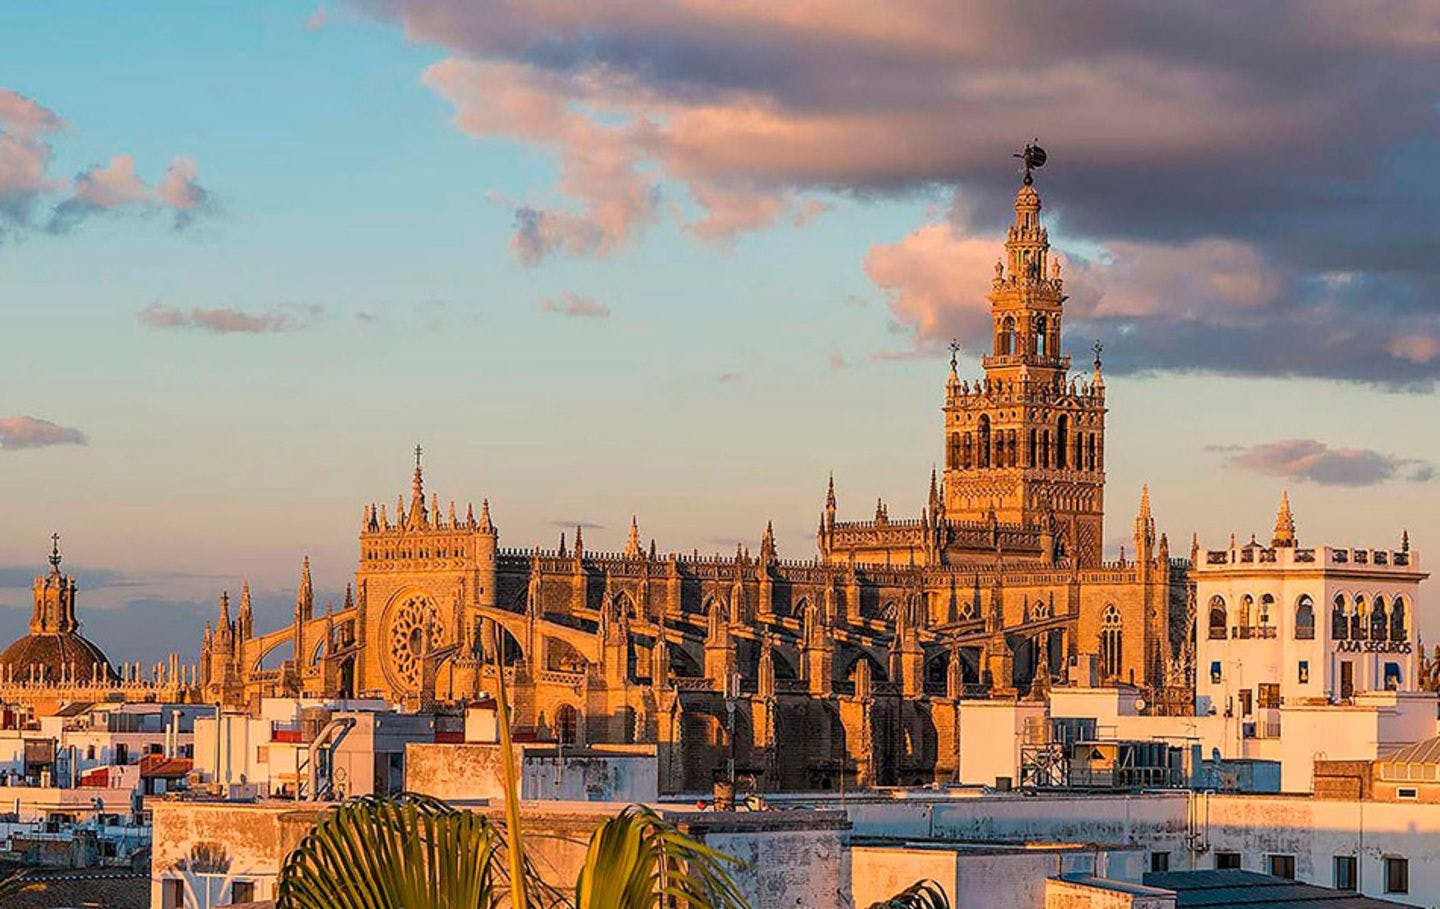 Dinner at a Rooftop Restaurant with Views of the Giralda 